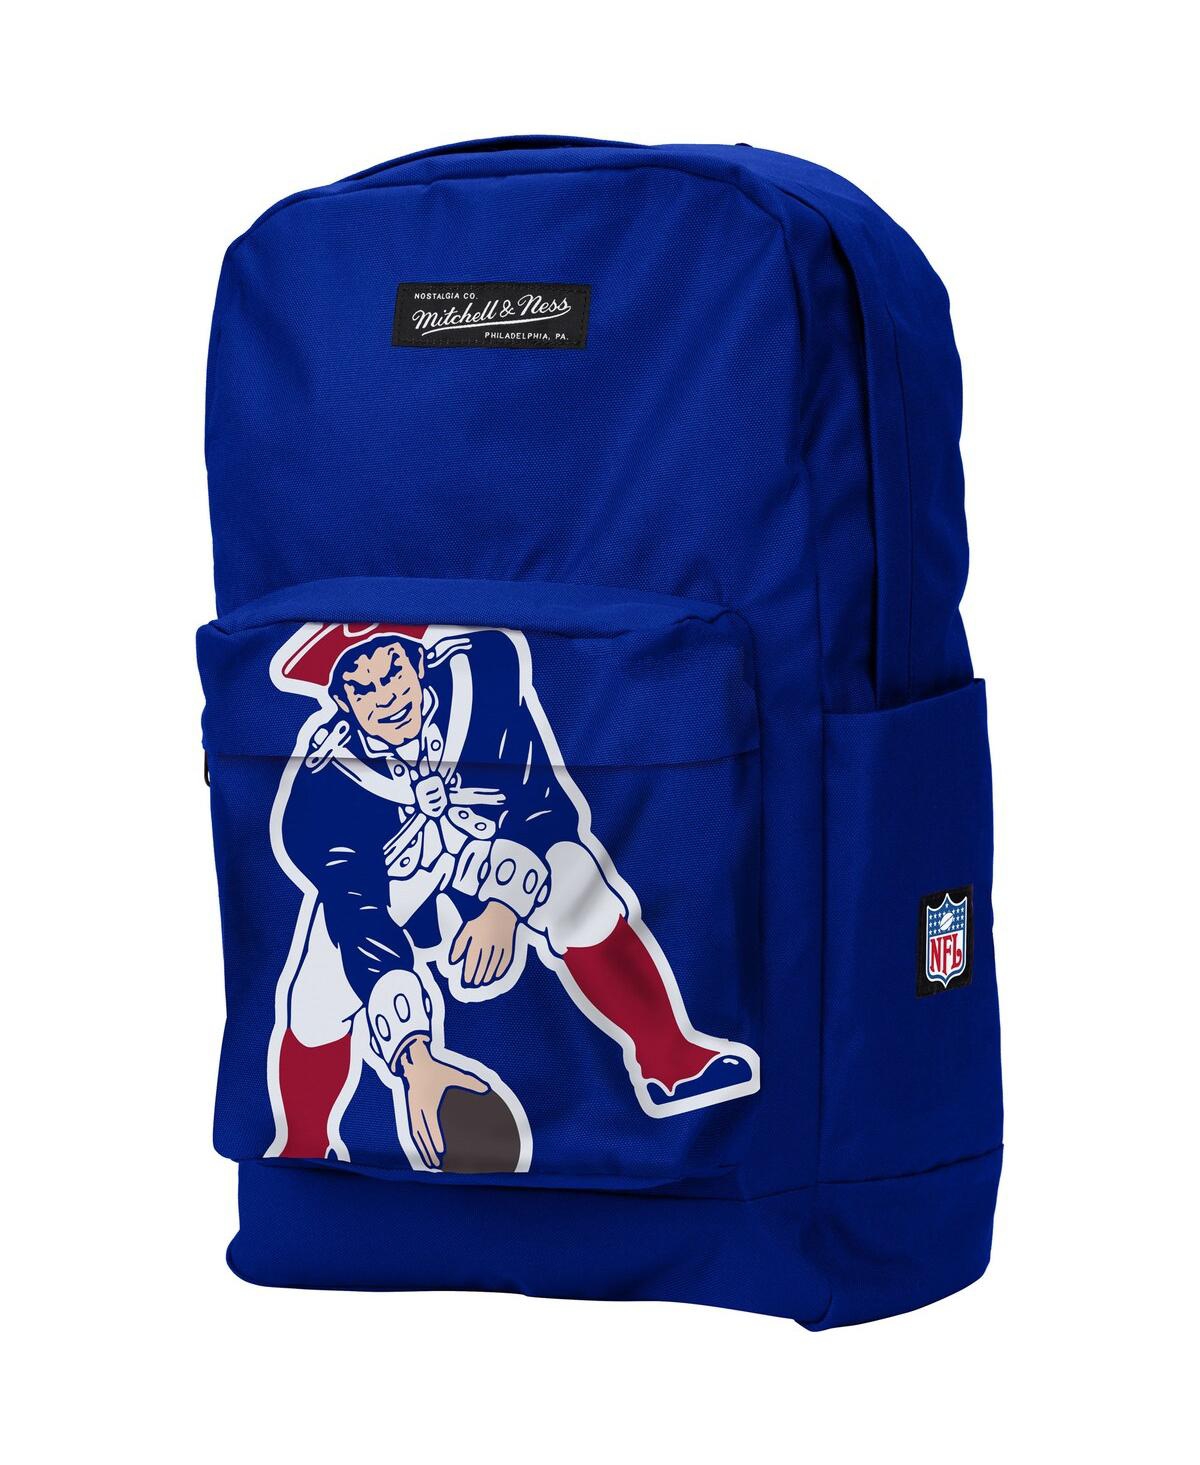 New England Patriots Backpack - Blue